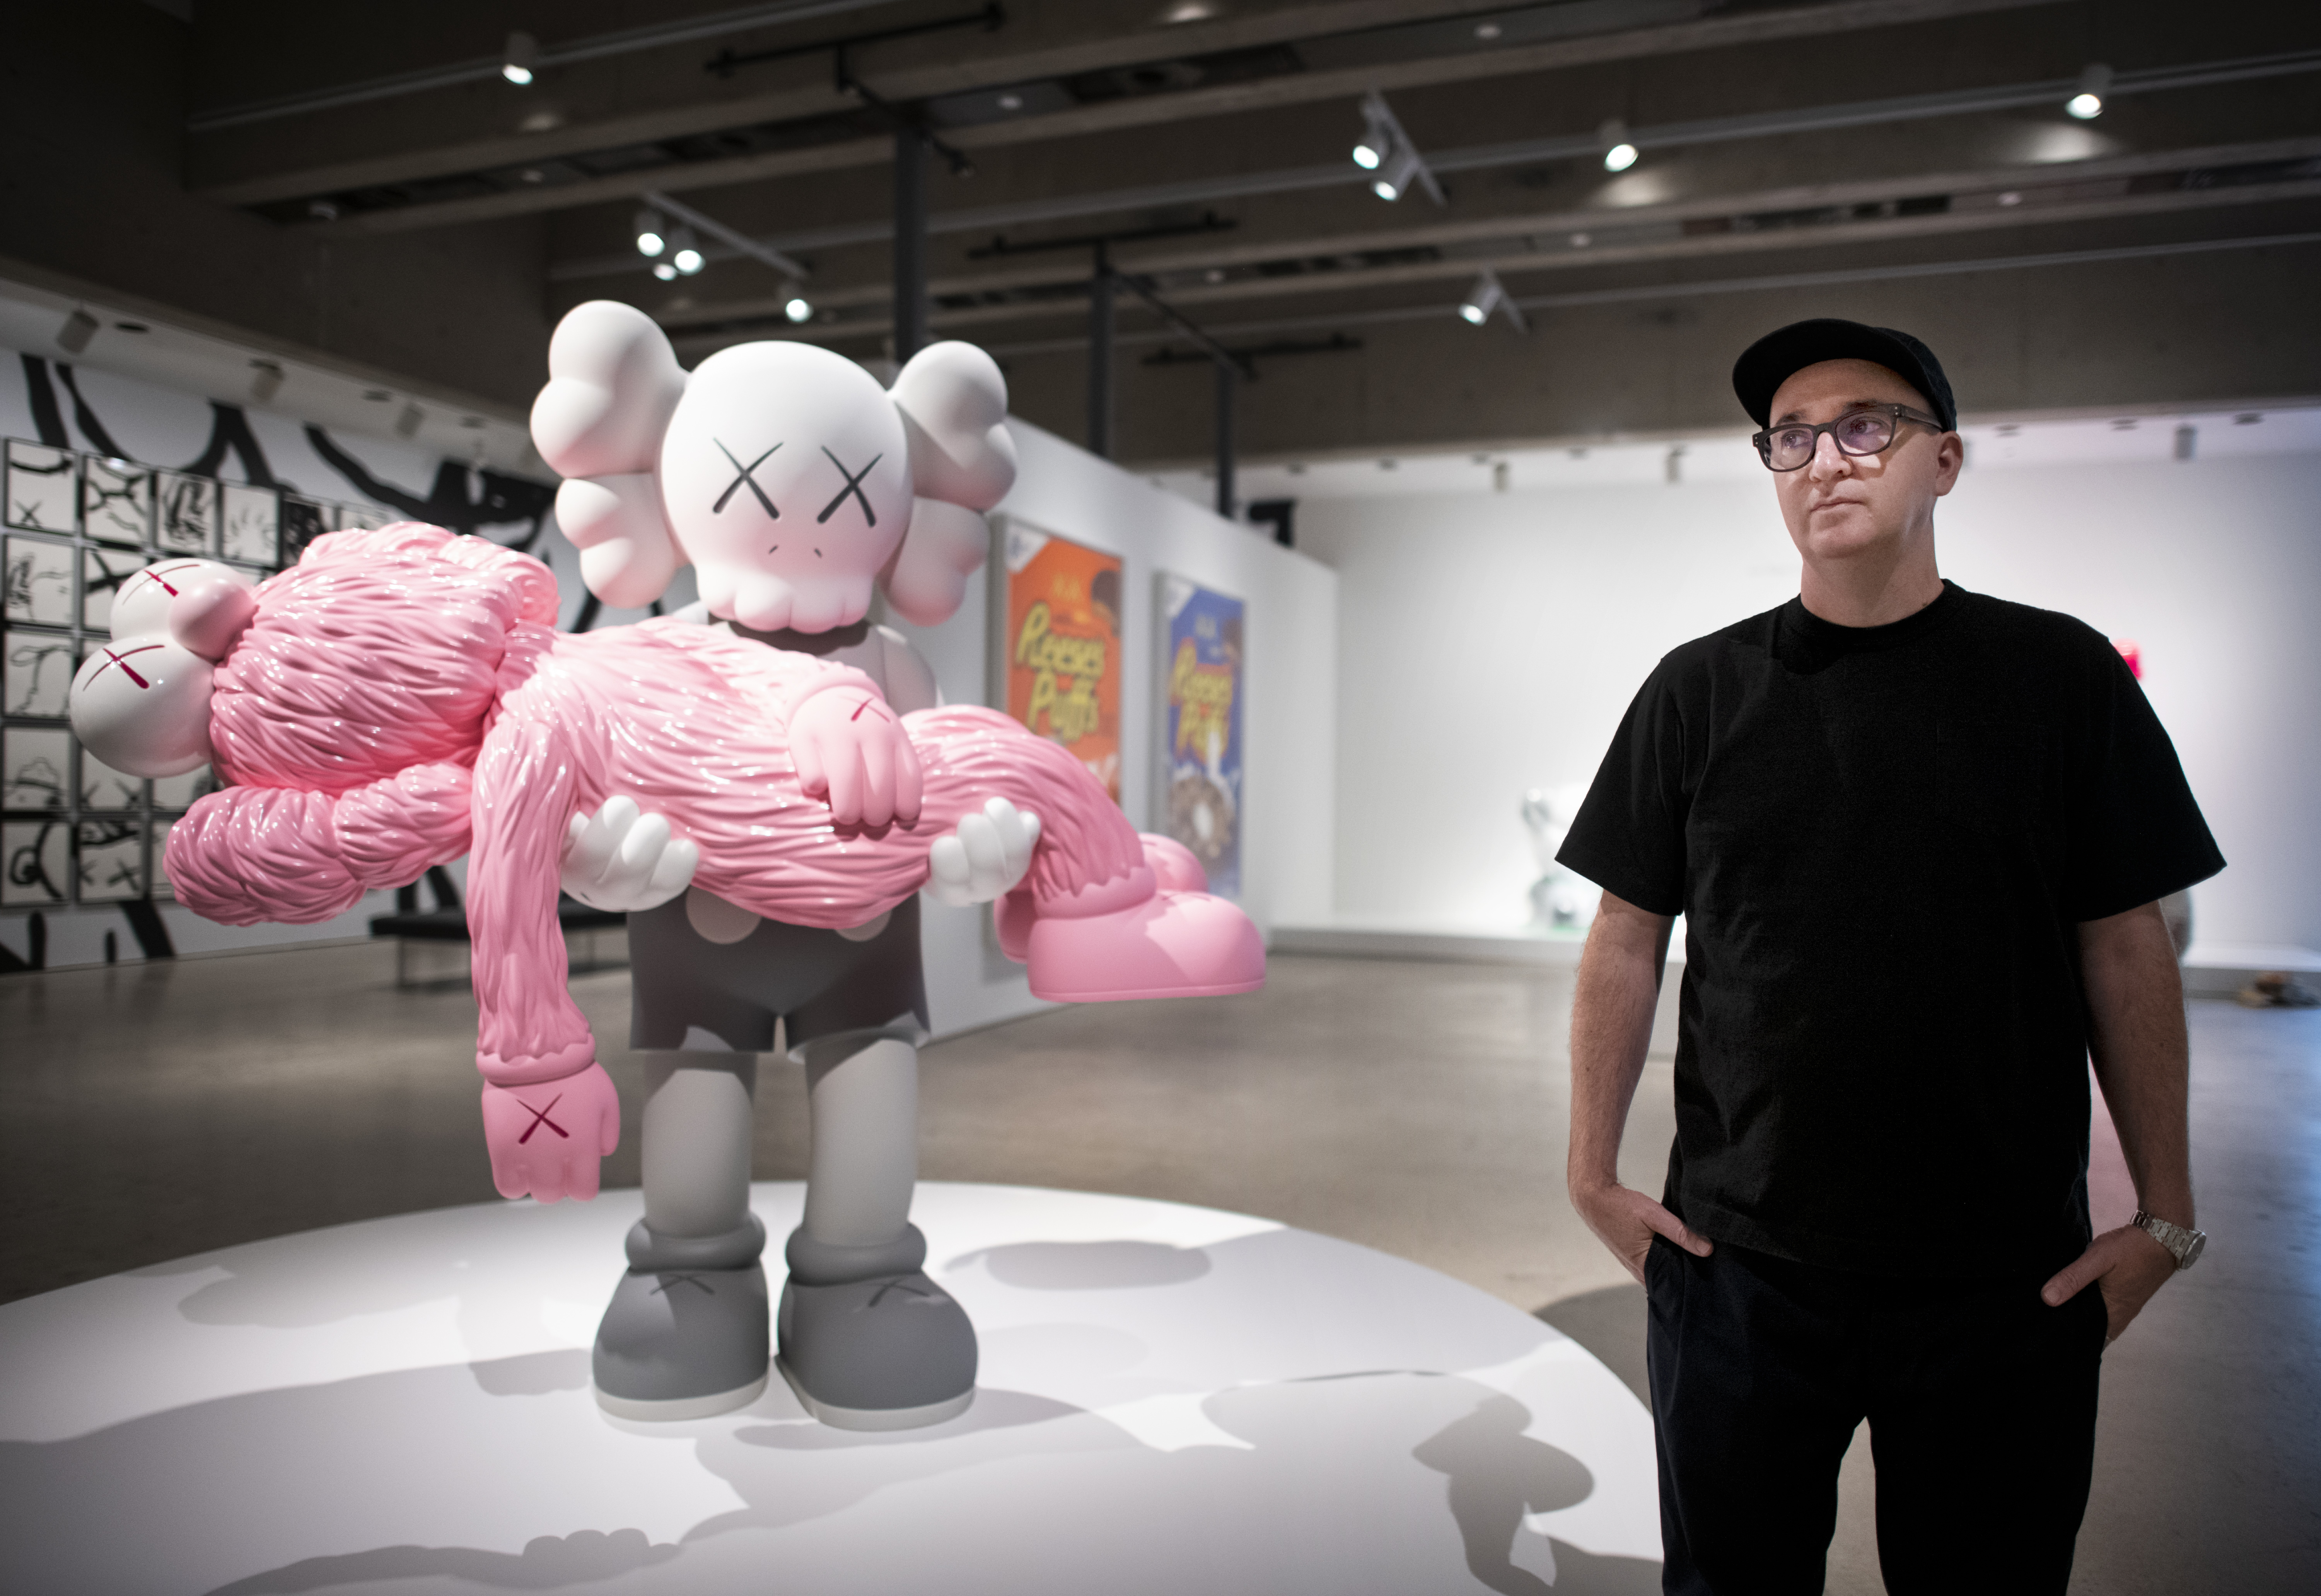 Top-10 Tuesday: The Top-10 Most Valuable KAWS Figures - The hobbyDB Blog